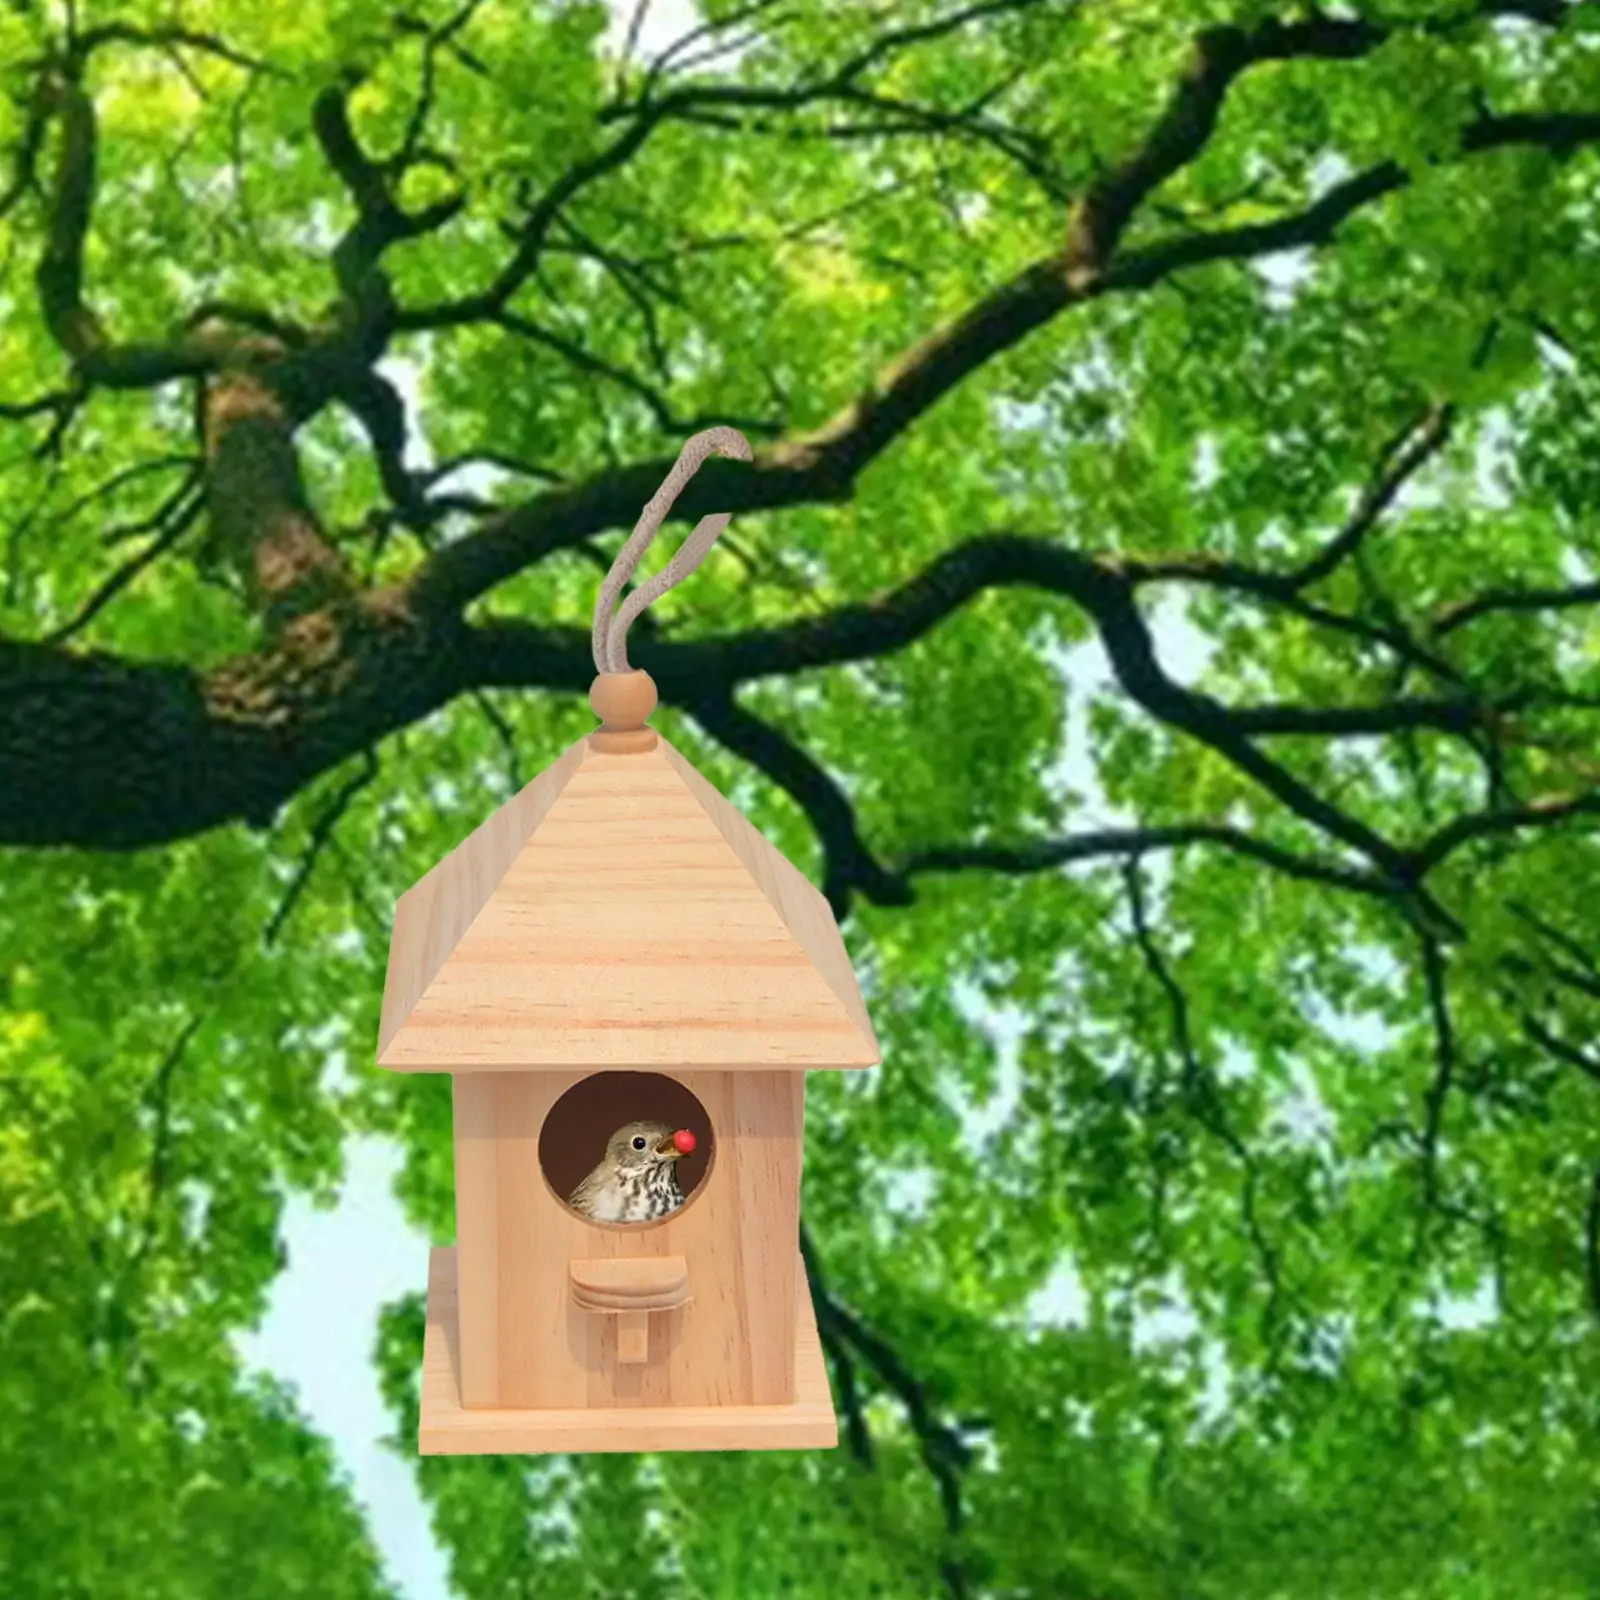 Wooden Birdhouse DIY Arts Crafts Decoration with Viewing Window Doodle Wood Paint Bird House for Yard Small Birds Children Adult